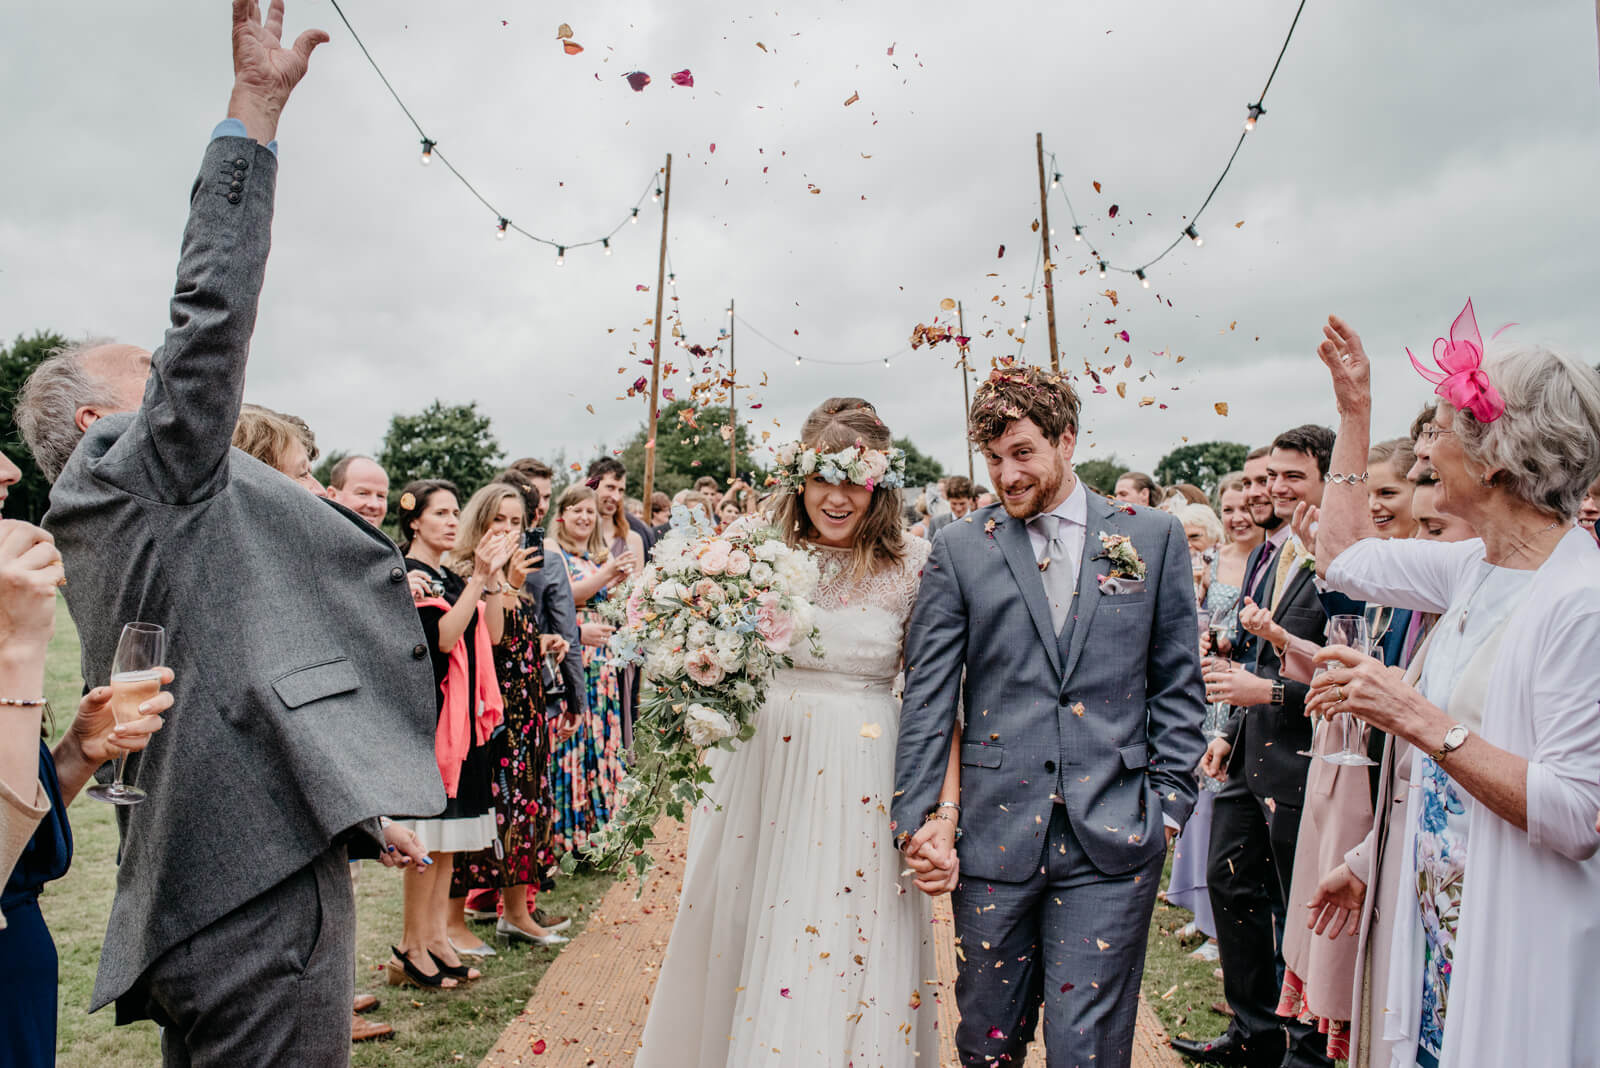 Bride wearing floral crown and groom passing through confetti gauntlet on their way to Shropshire tipi wedding reception